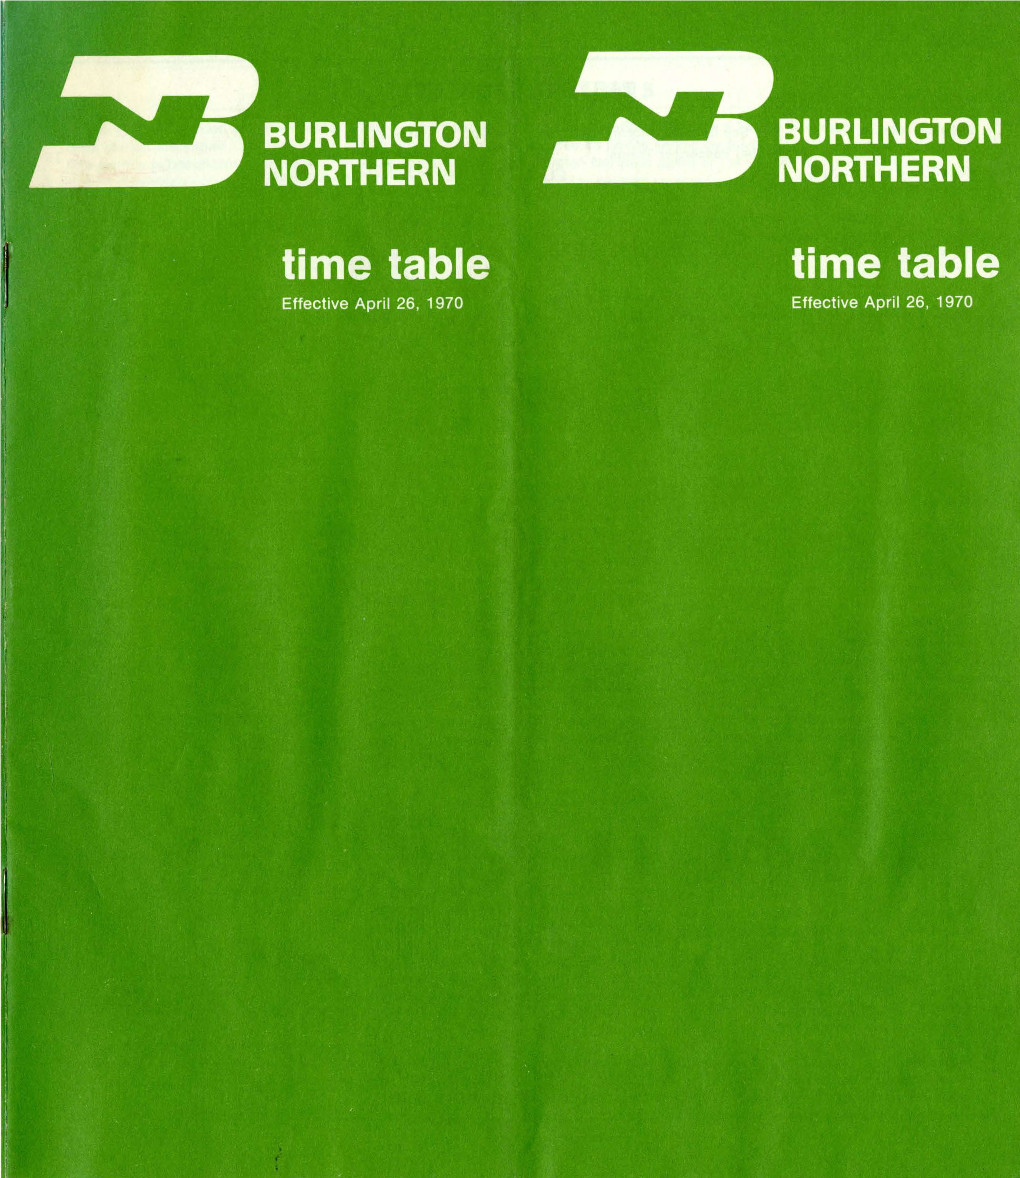 Time Table Time Table Effective April 26, 1970 Effective April 26, 1970 Page 2